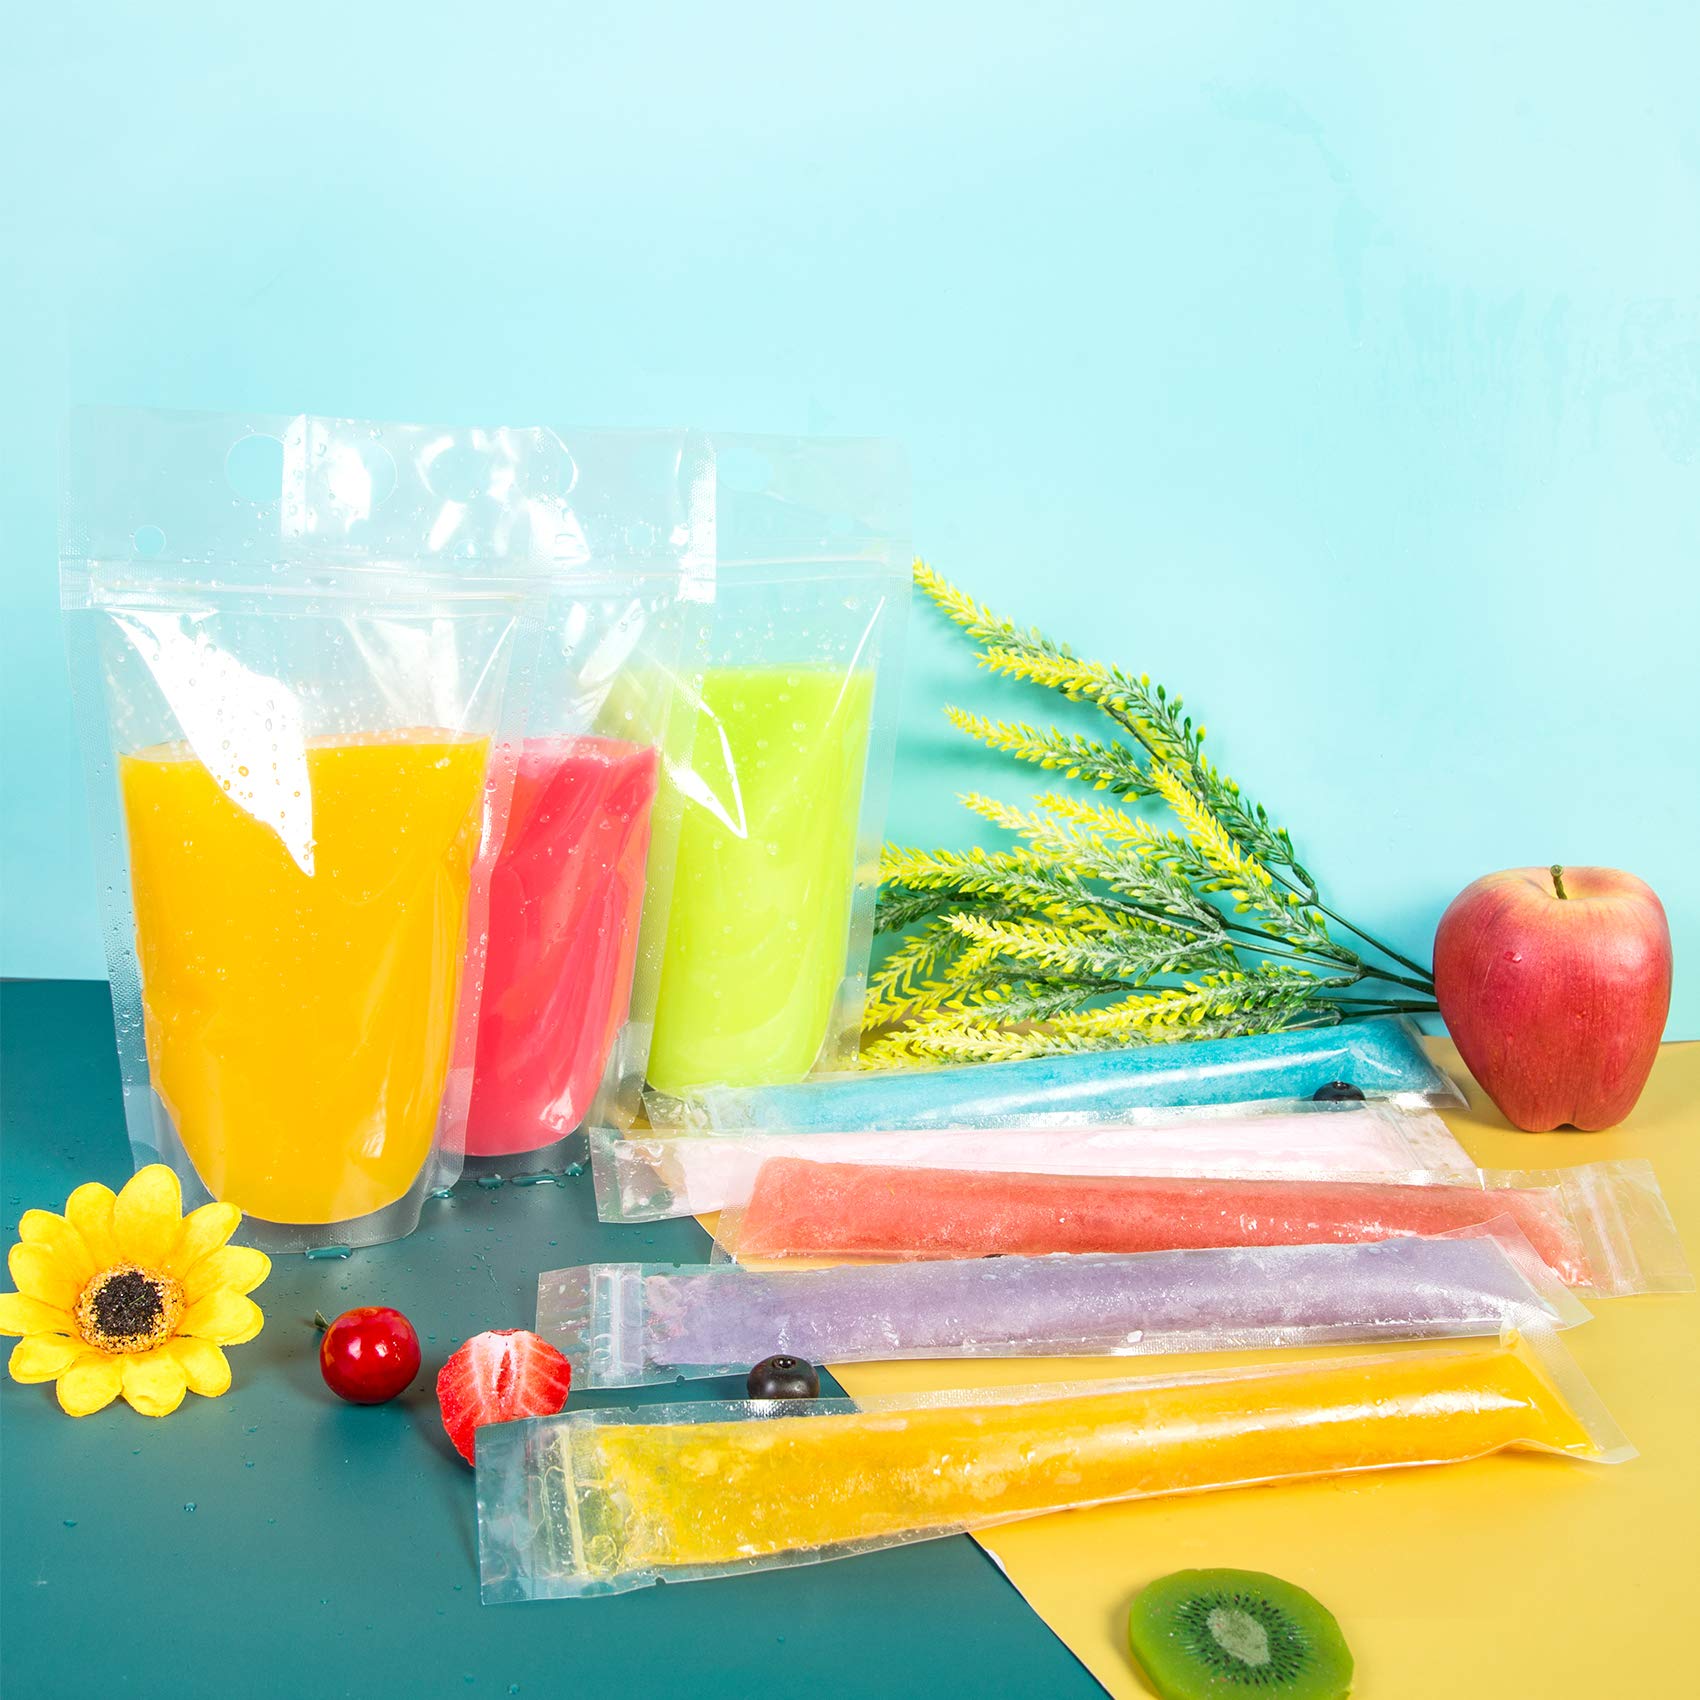 150 Pcs Drink Pouches and Popsicle Bags with Straws, 100 Pcs Smoothie Ice Pop Bags, 50 Pcs Hand-Held Reusable Drink Pouches for Adults 50 Pcs Straws Funnel for Cool Summer Party, Cold Hot Drinks